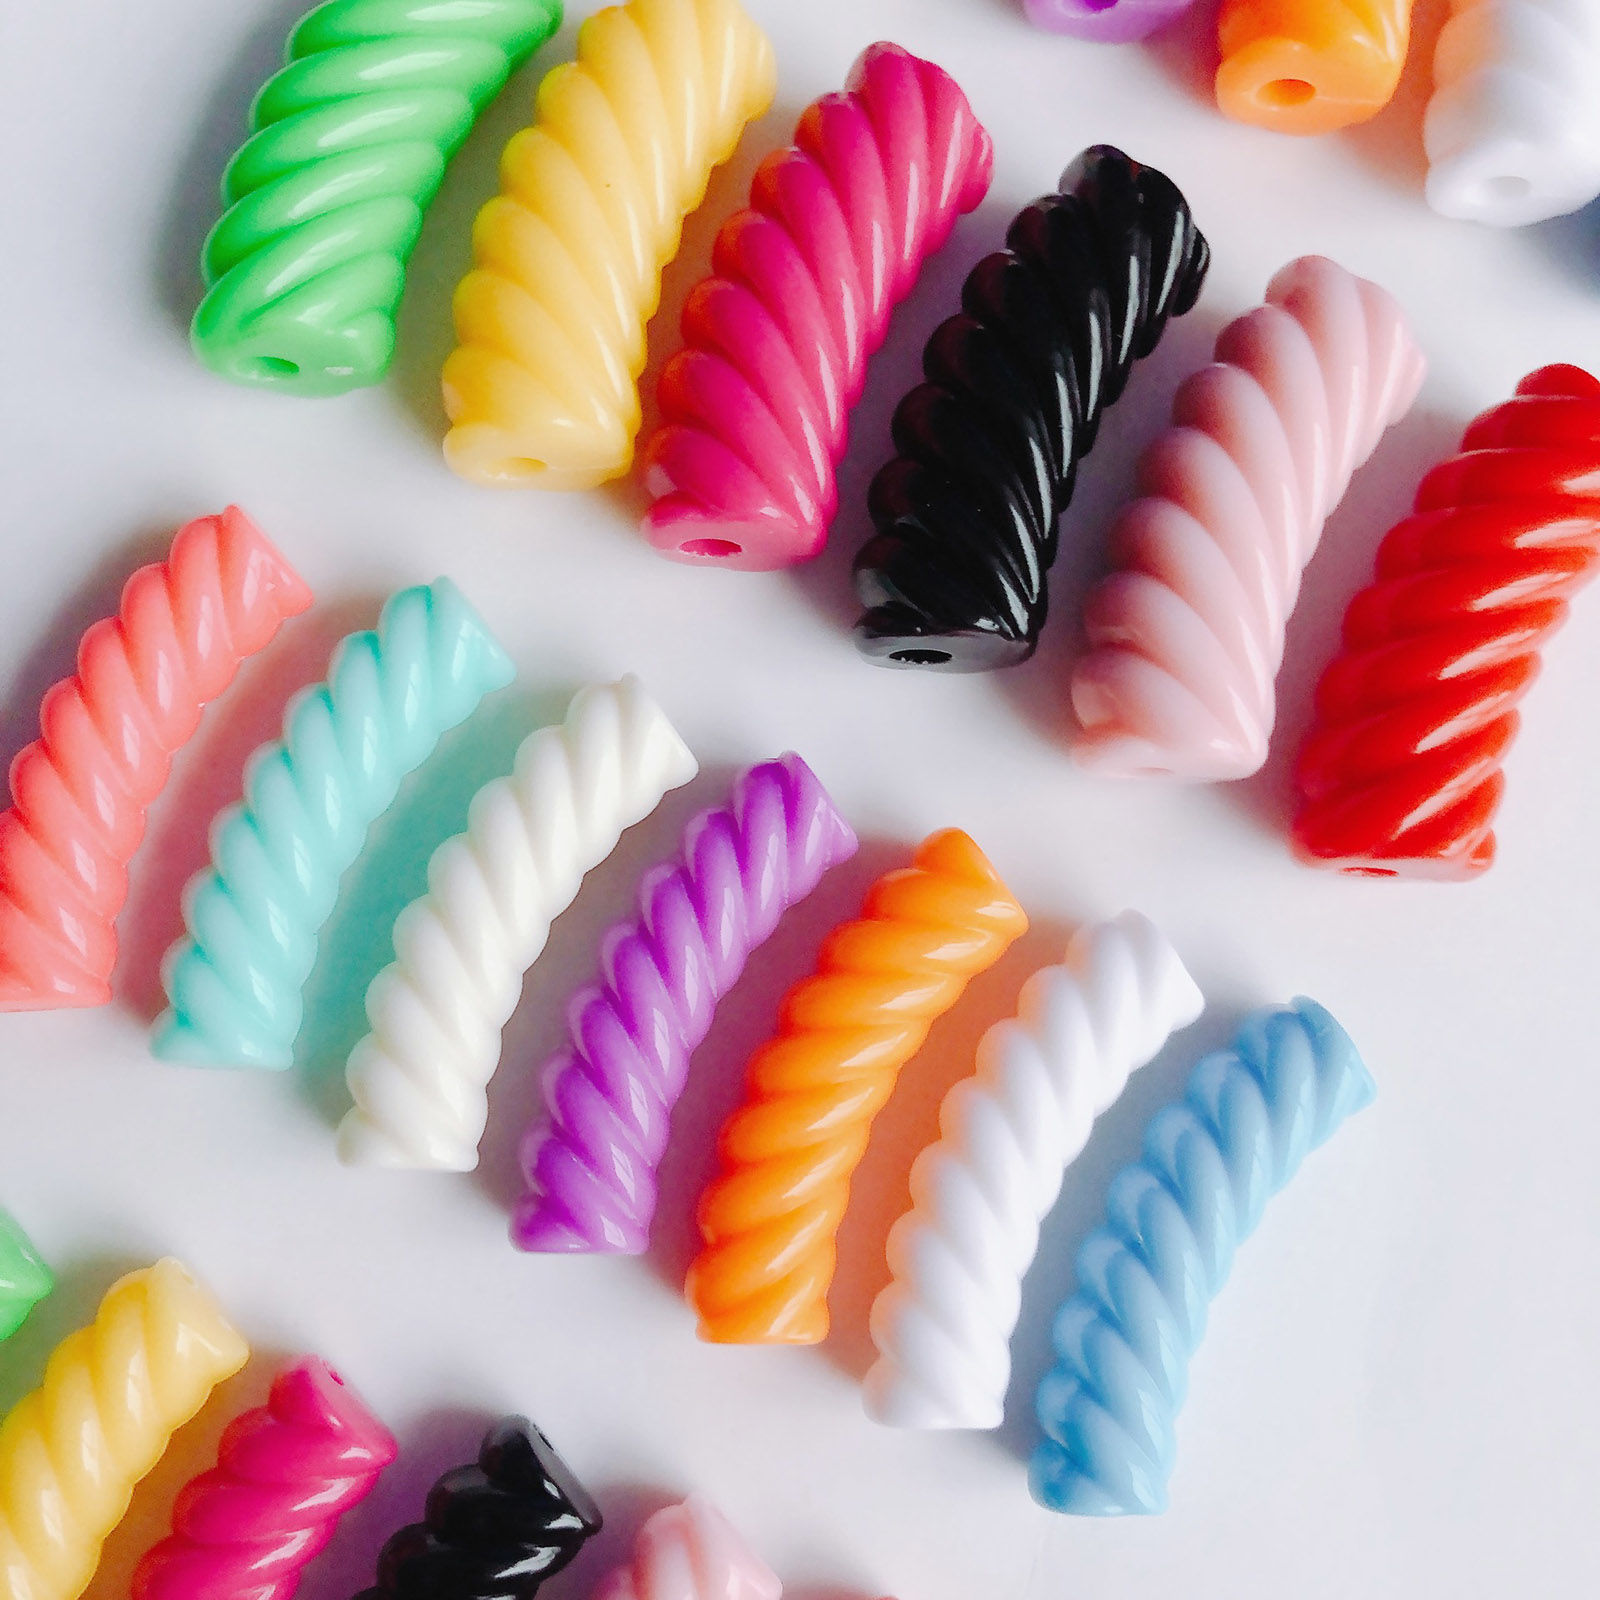 Picture of Acrylic Beads For DIY Charm Jewelry Making Multicolor Opaque Arc Stripe About 3.2cm x 0.9cm